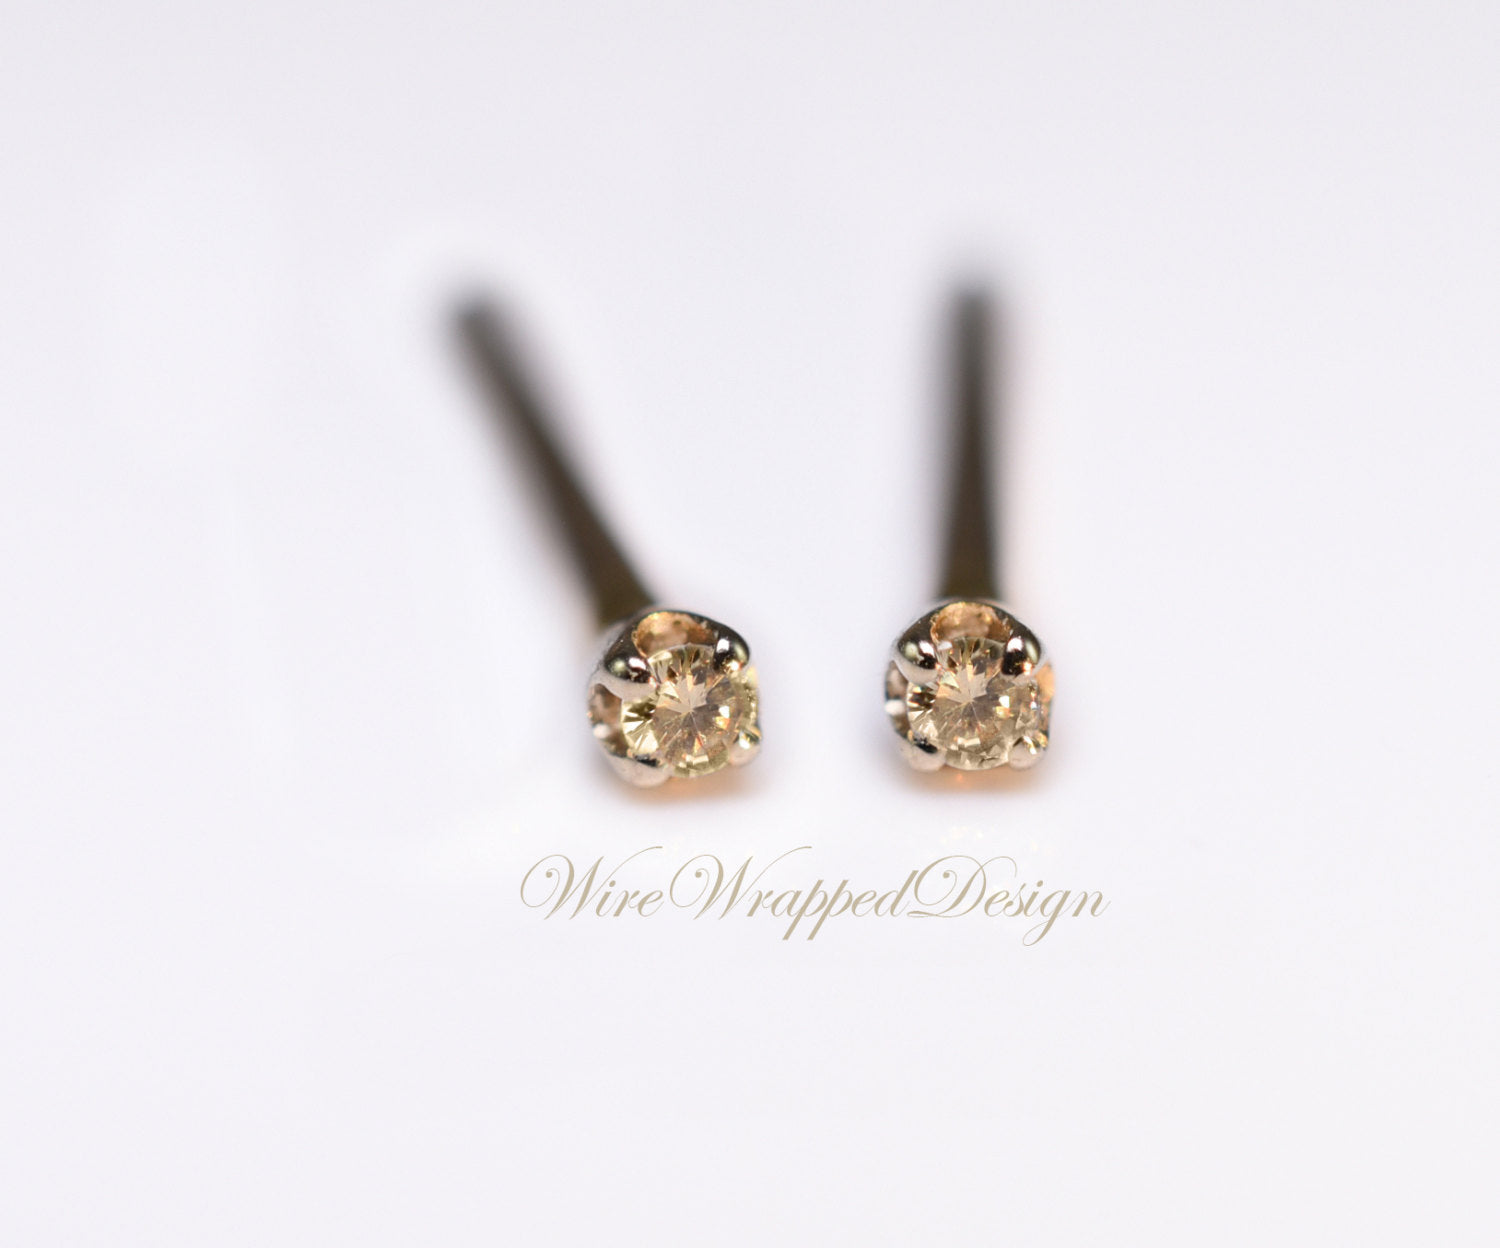 Genuine Brown DIAMOND Earring Studs 1.3mm 0.02tcw Post 14k Solid Gold (Yellow, Rose or White), Platinum, Silver Lobe Cartilage Helix Tragus